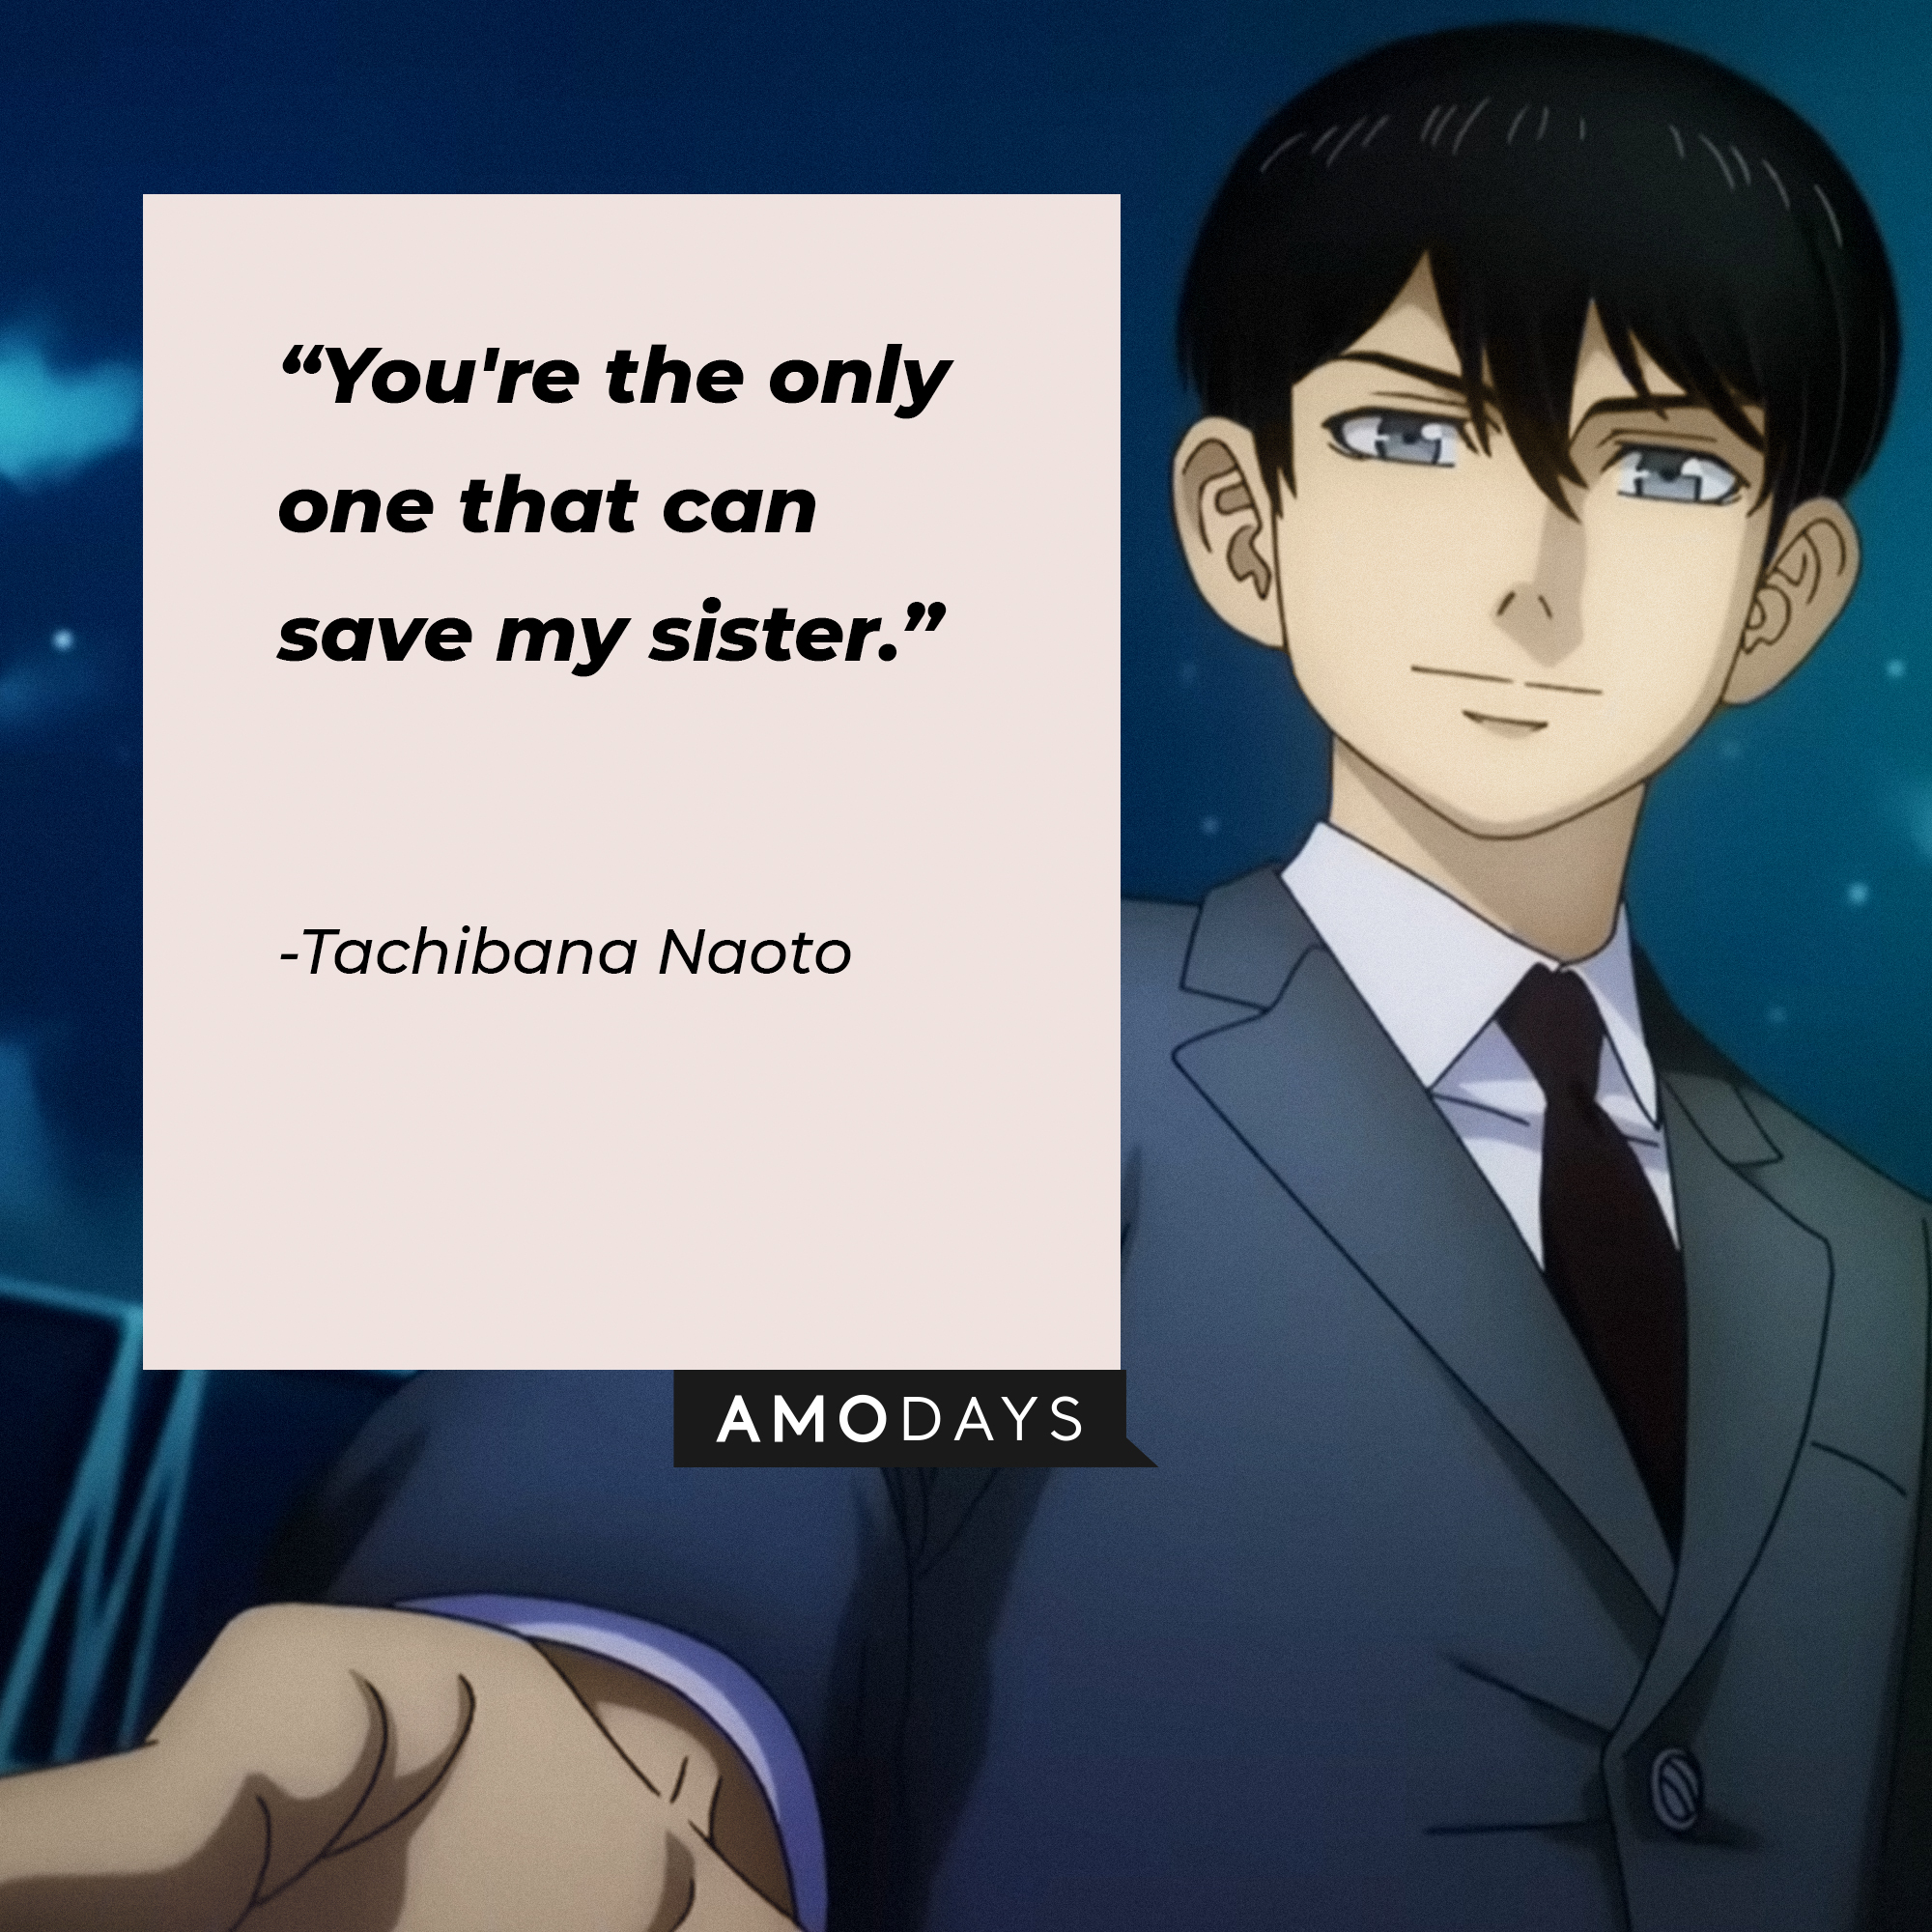 Tachibana Naoto's quote: "You're the only one that can save my sister." | Source: Youtube.com/Crunchyroll Collection